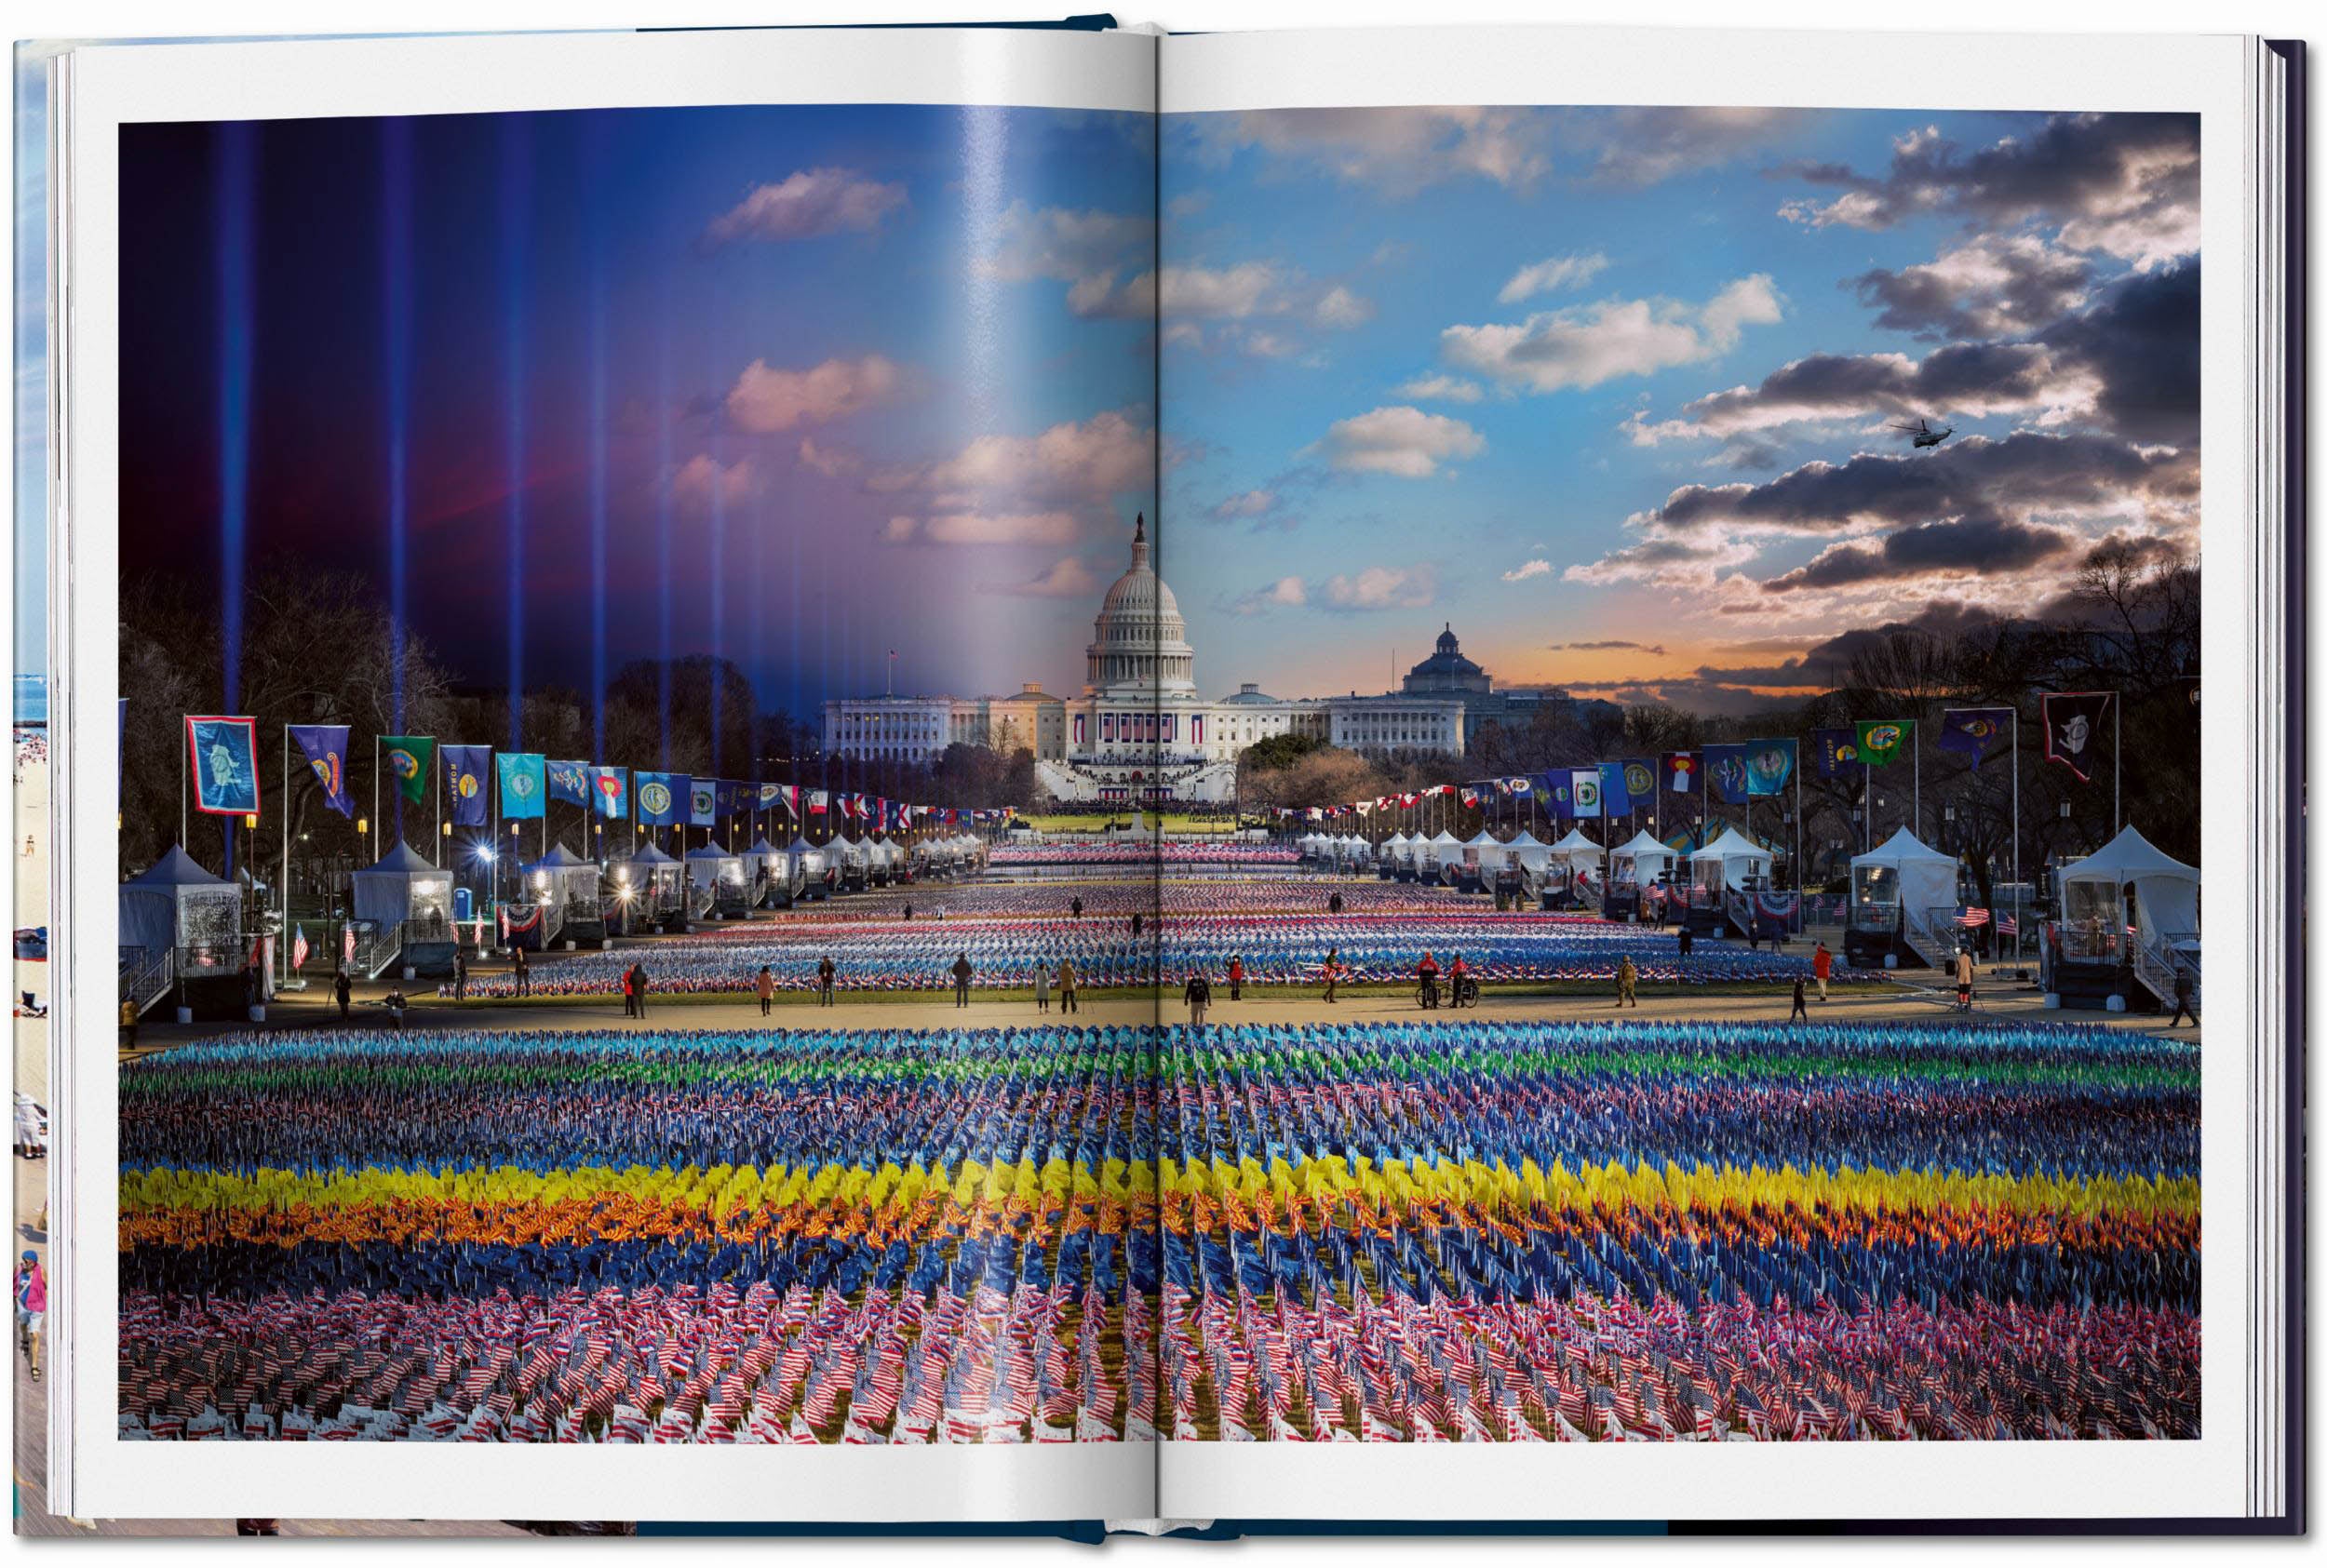 Stephen Wilkes. Day to Night. XL